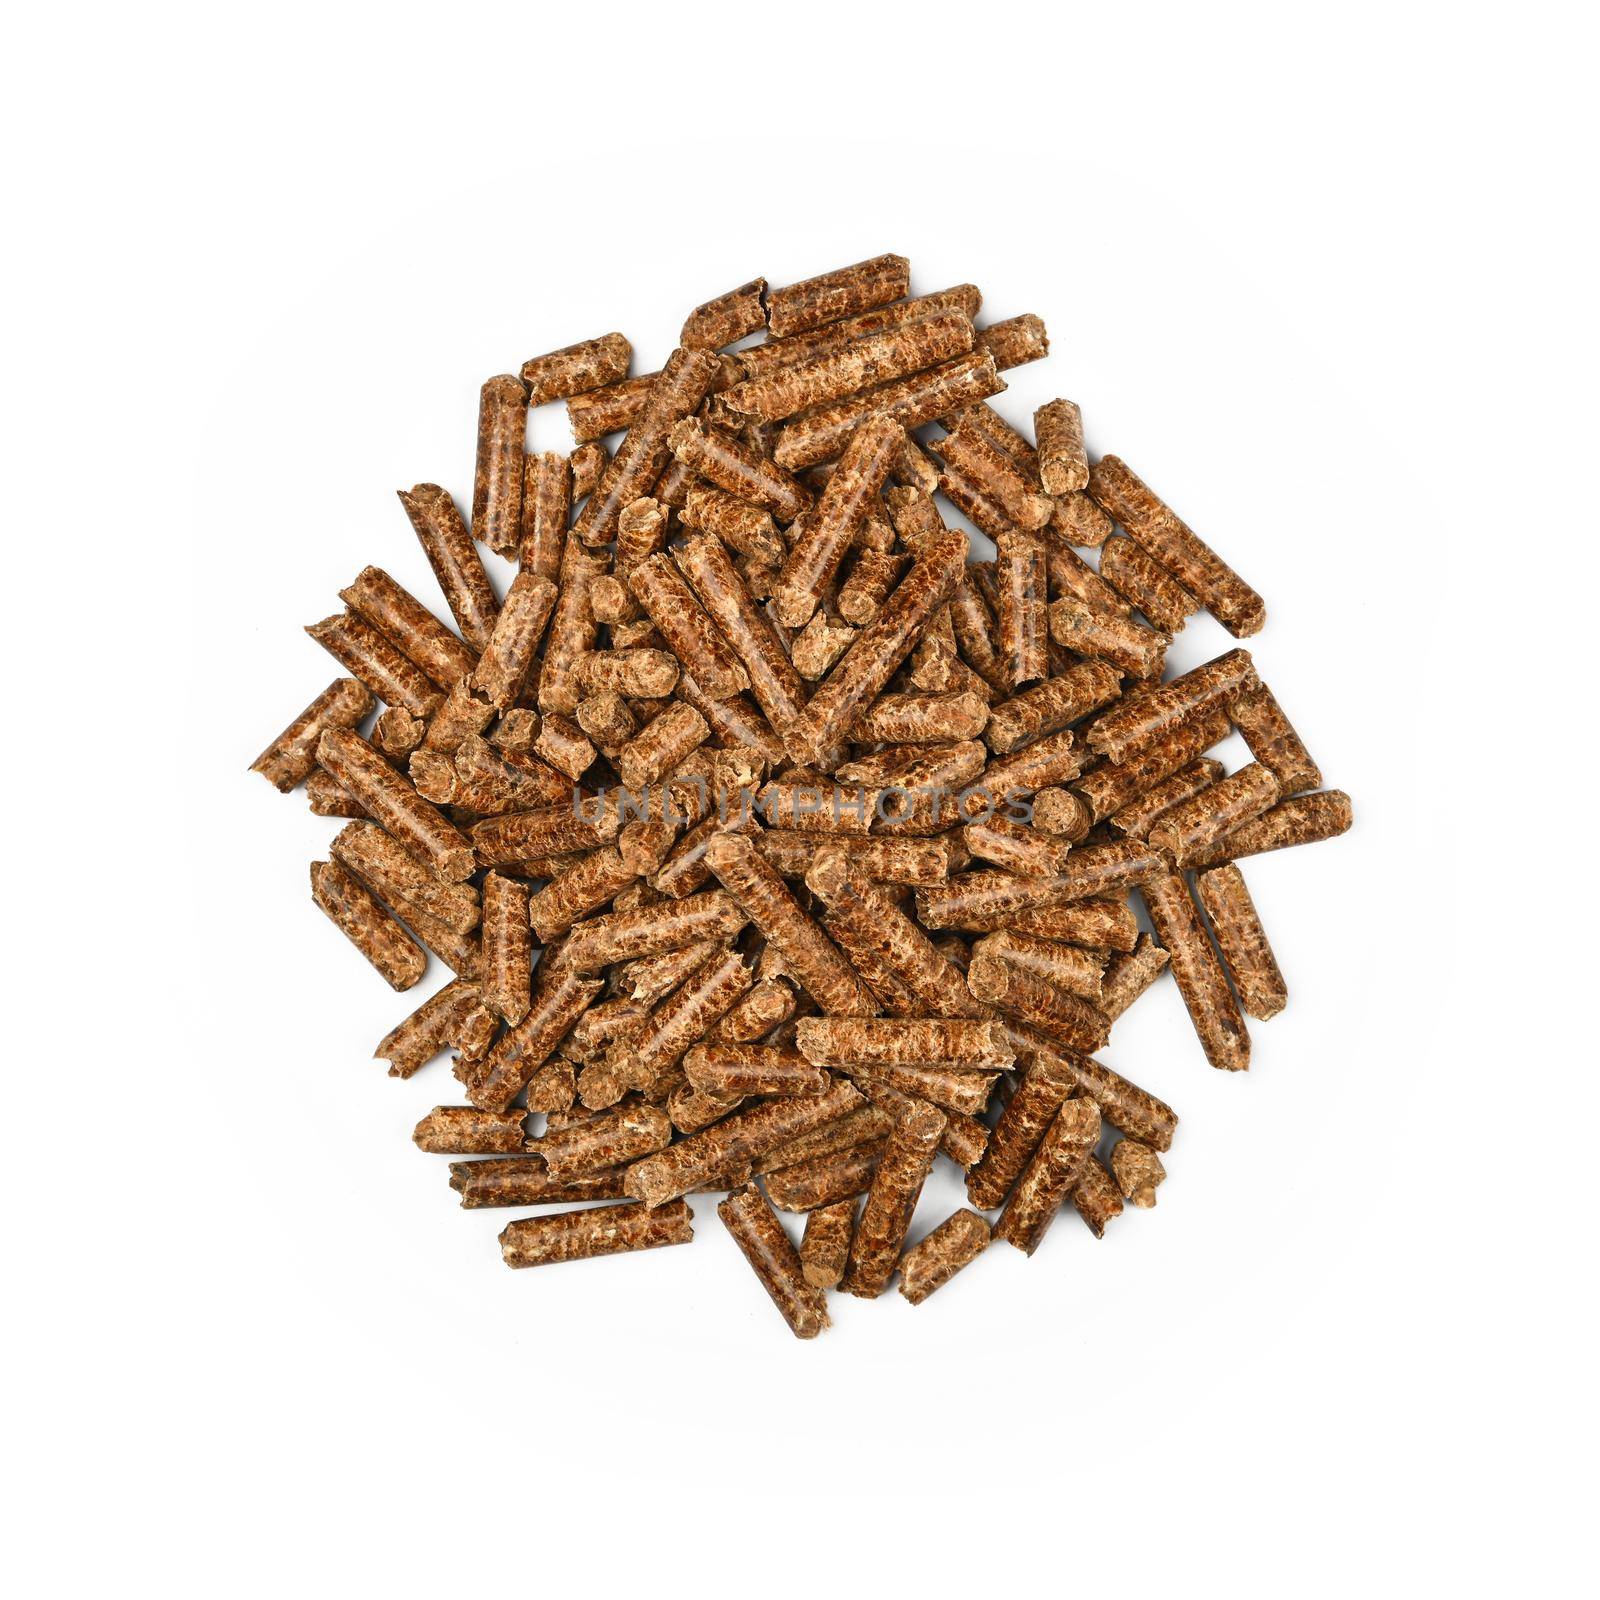 Close up pile of hardwood pellets for natural food smoking and cooking, isolated on white background, elevated top view, directly above